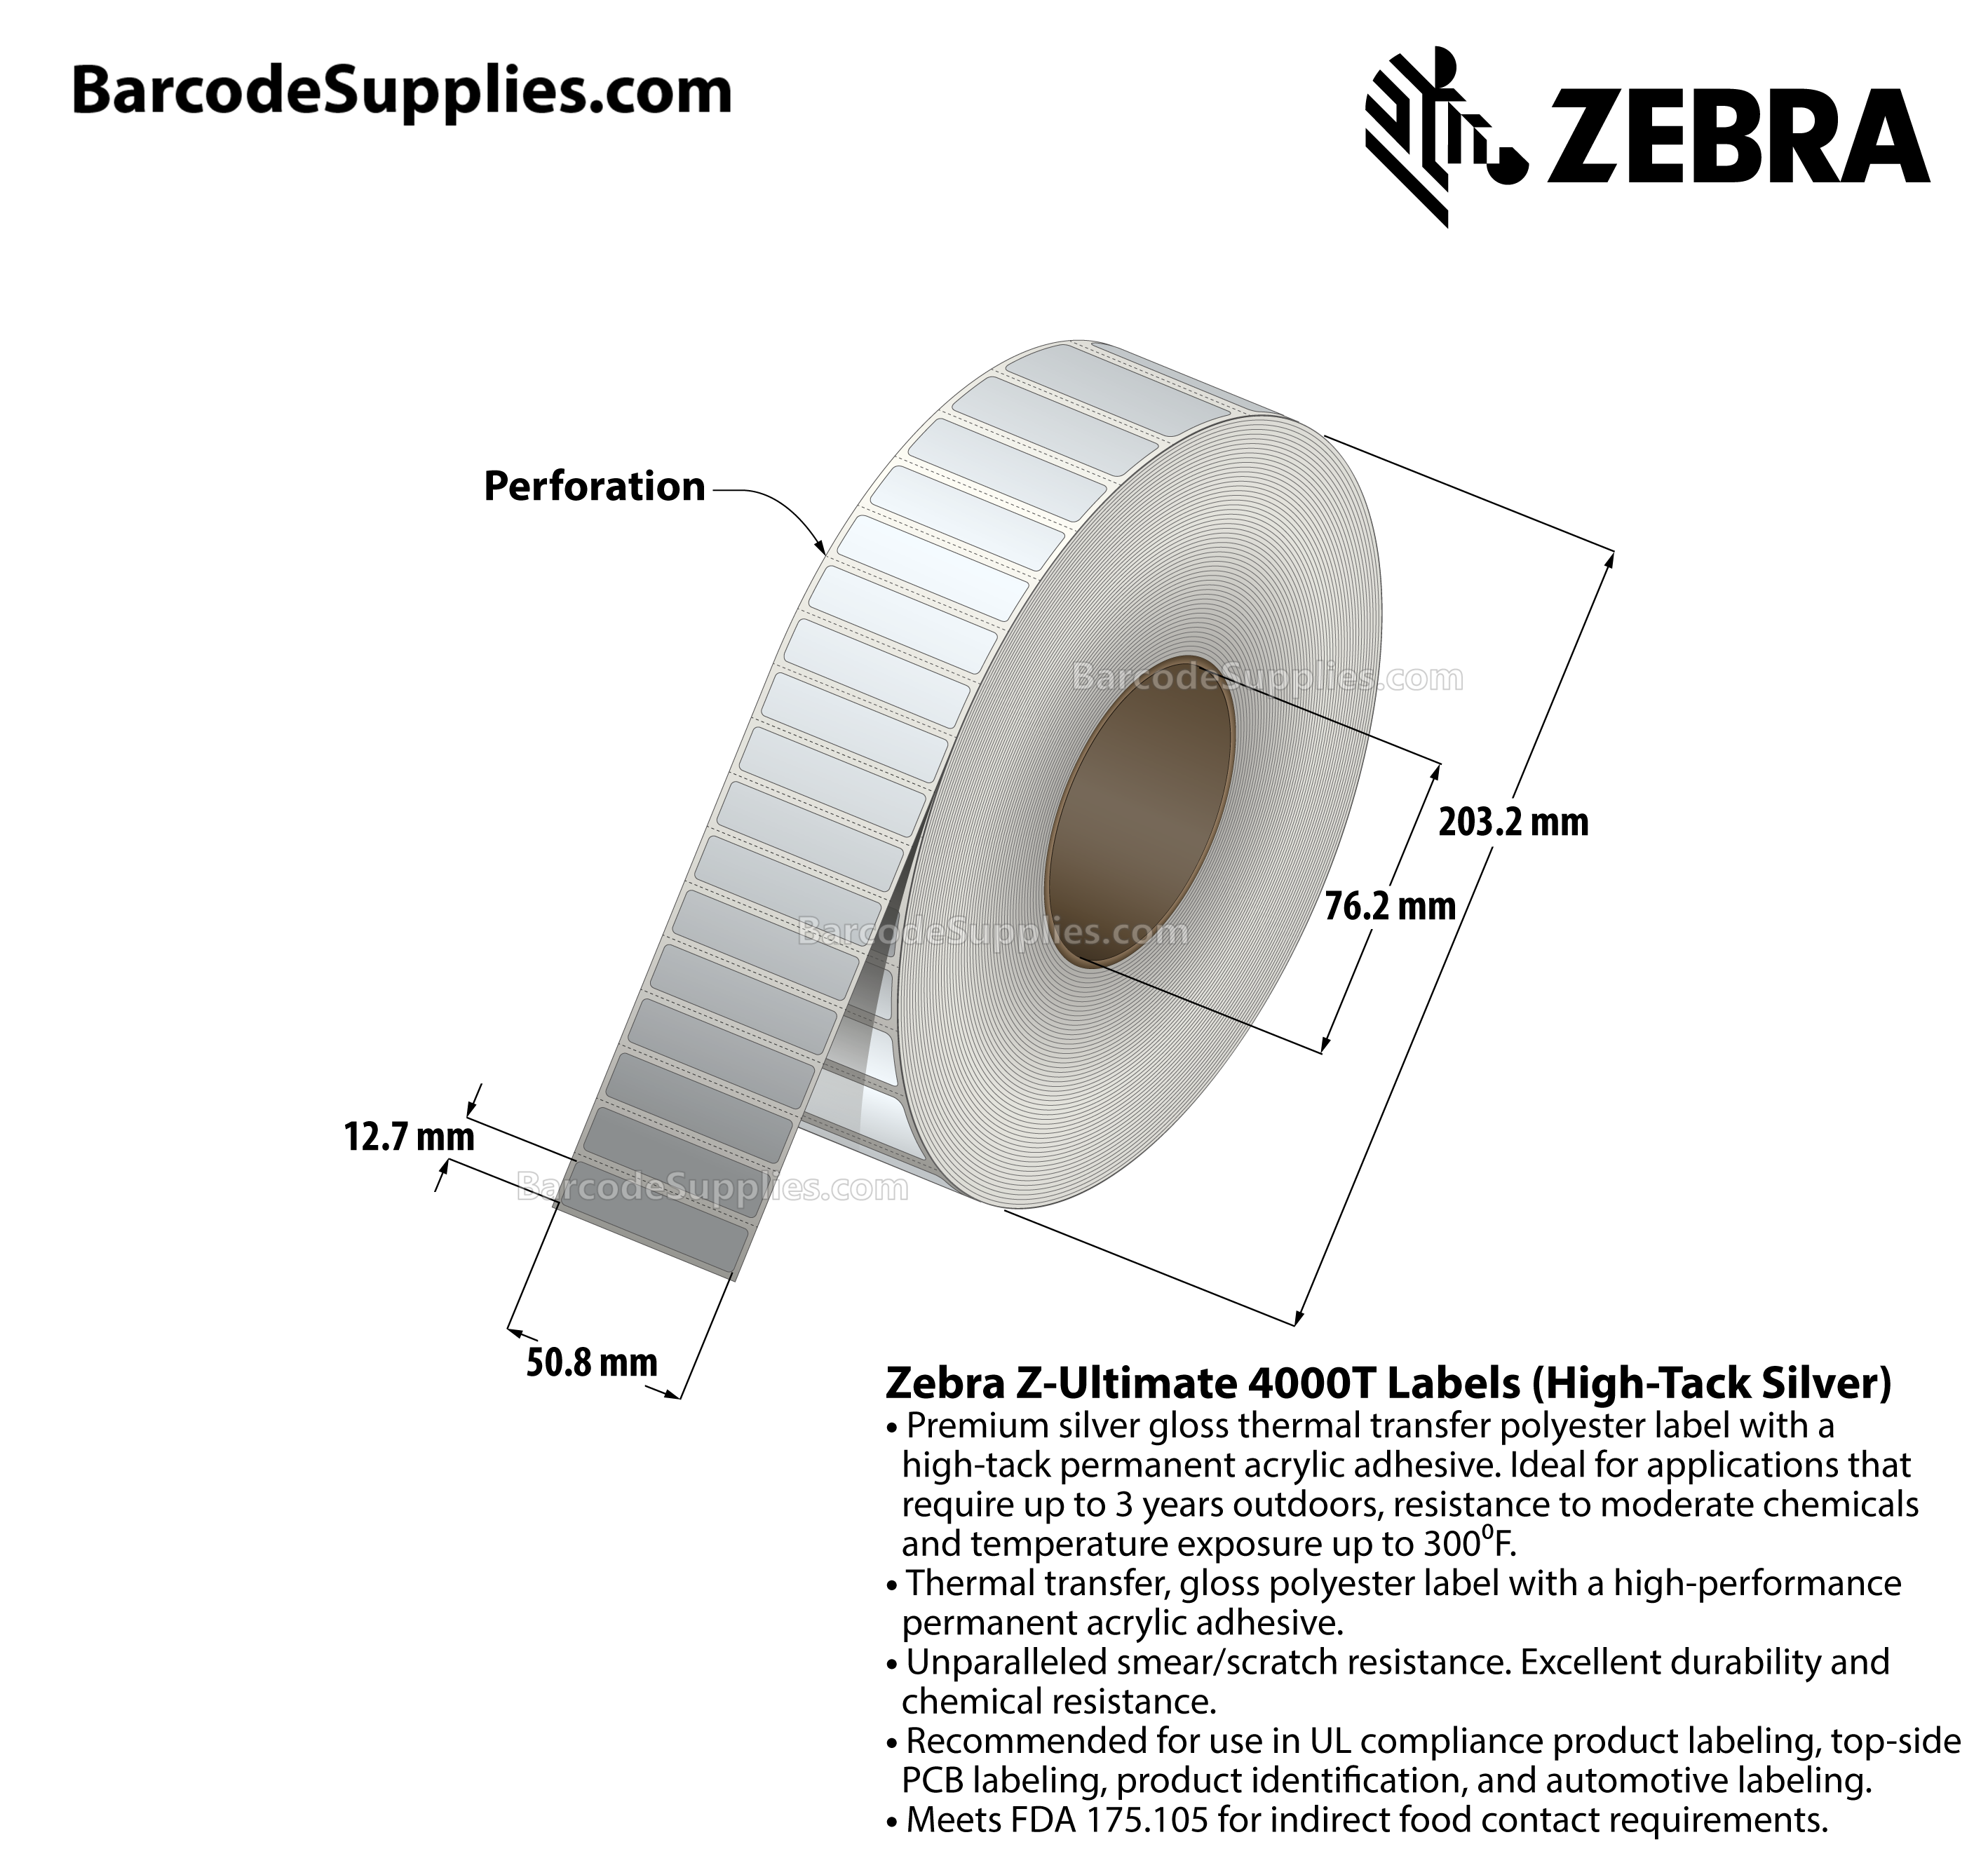 2 x 0.5 Thermal Transfer Silver Z-Ultimate 4000T High-Tack Silver Labels With High-tack Adhesive - Perforated - 3000 Labels Per Roll - Carton Of 1 Rolls - 3000 Labels Total - MPN: 10023351